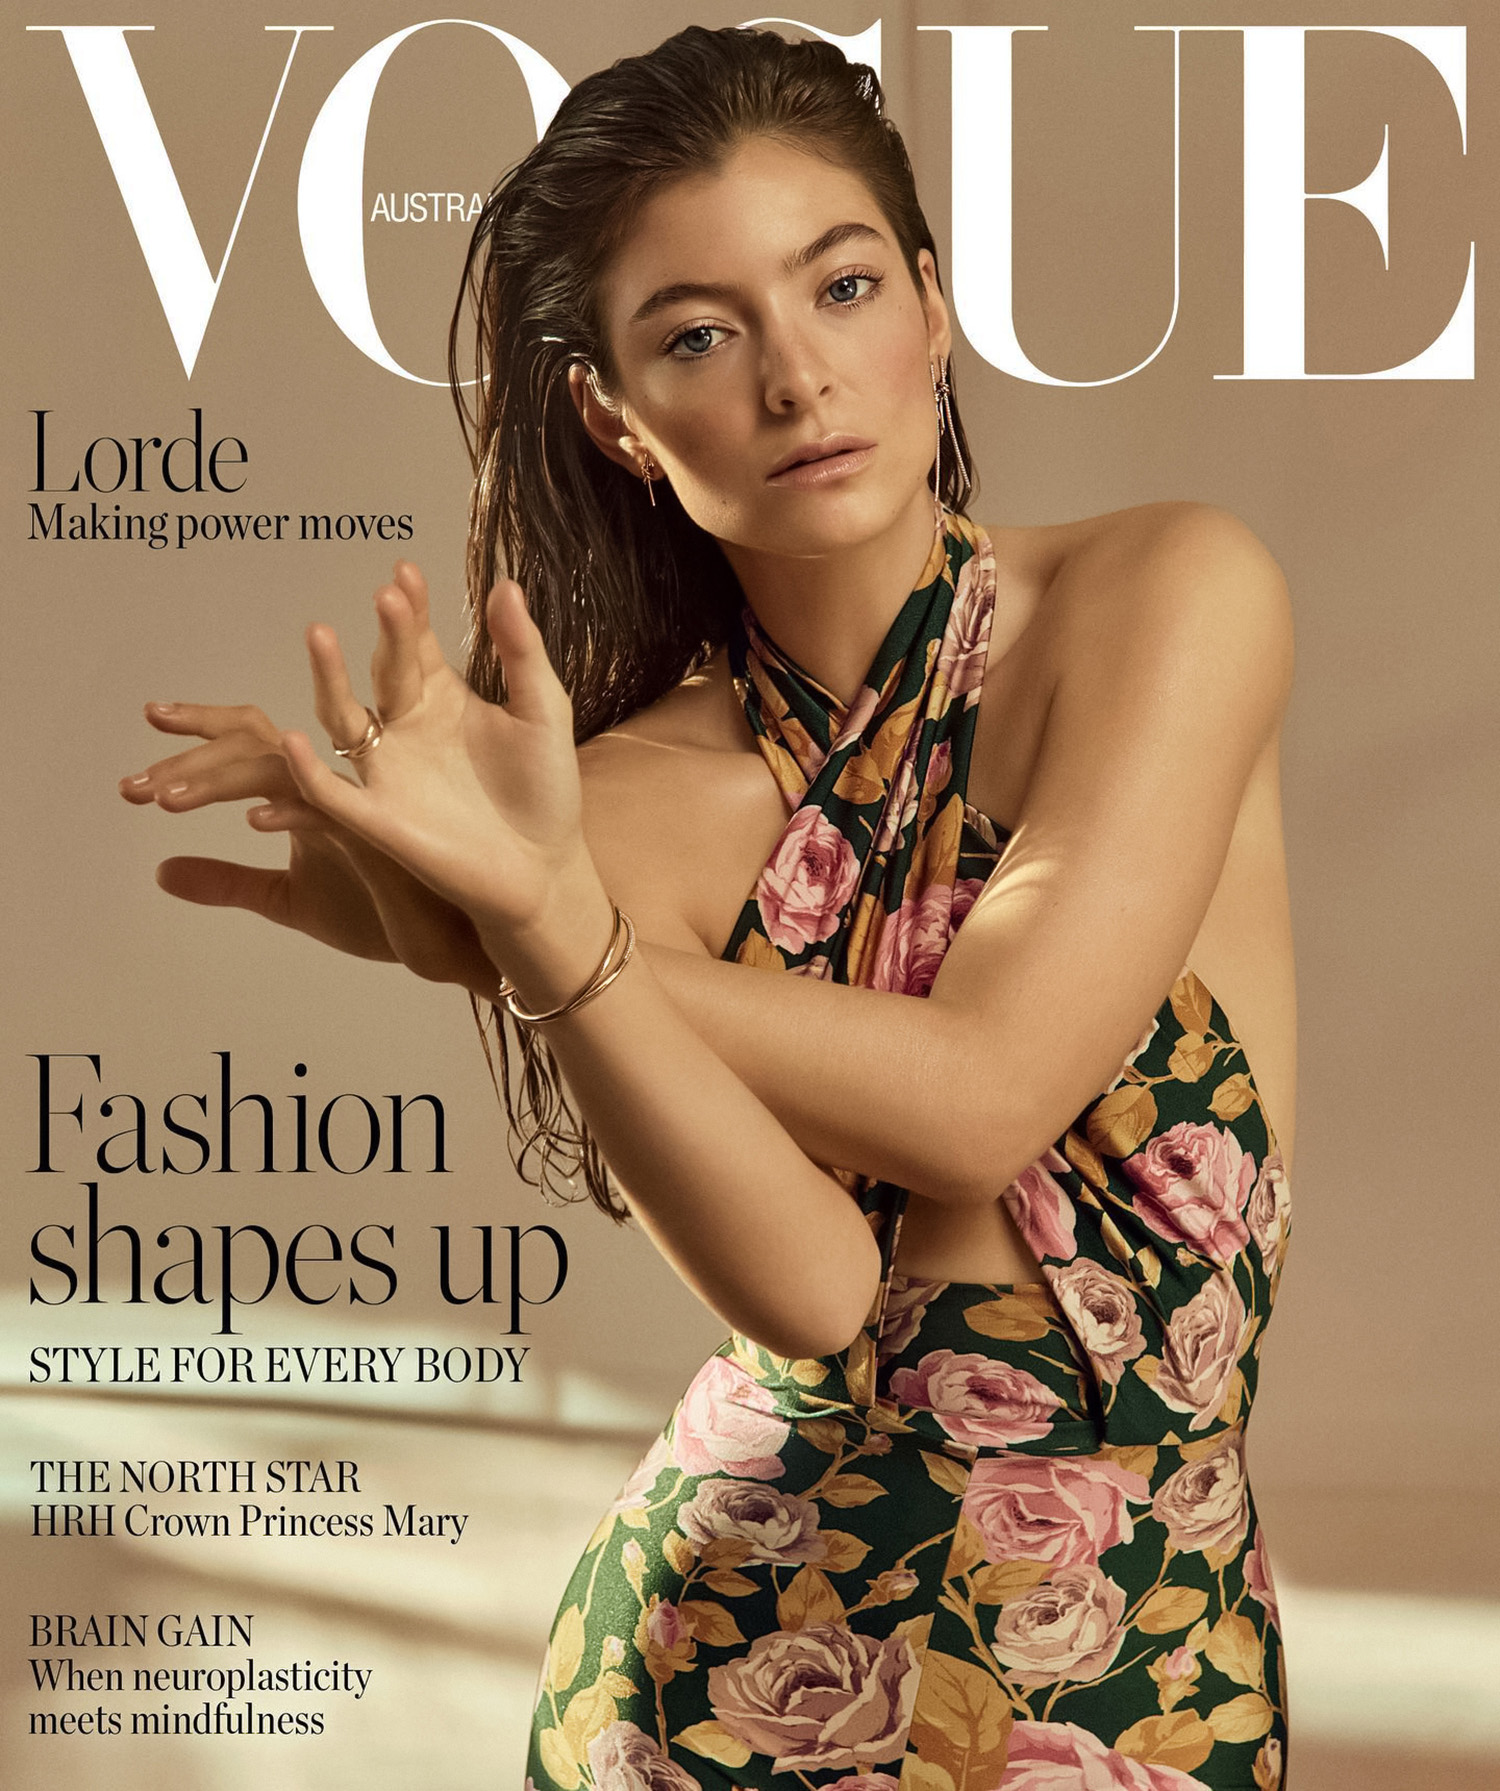 Lorde covers Vogue Australia March 2022 by Alique